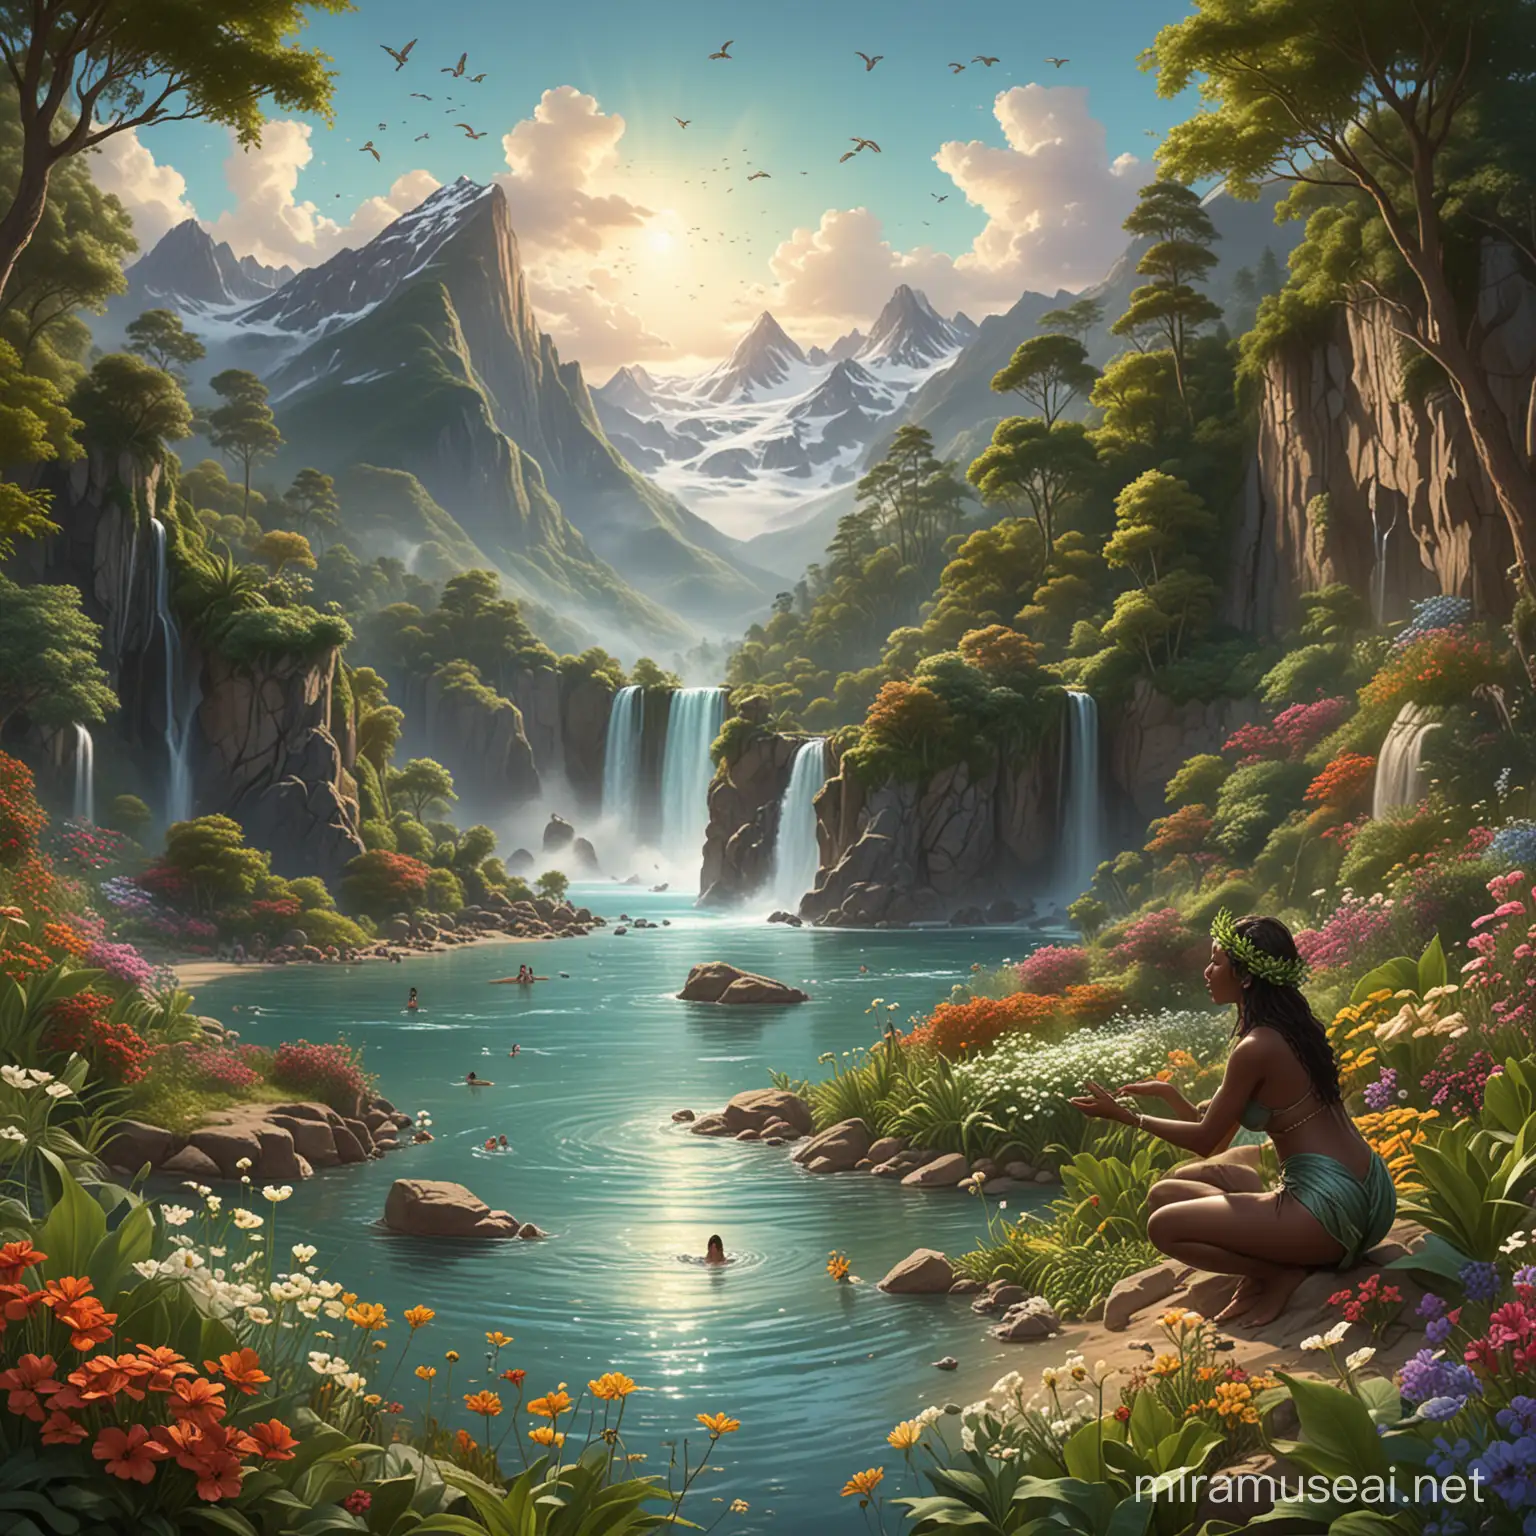 Serene Mother Nature Holding Earth EcoFriendly Harmony Digital Painting